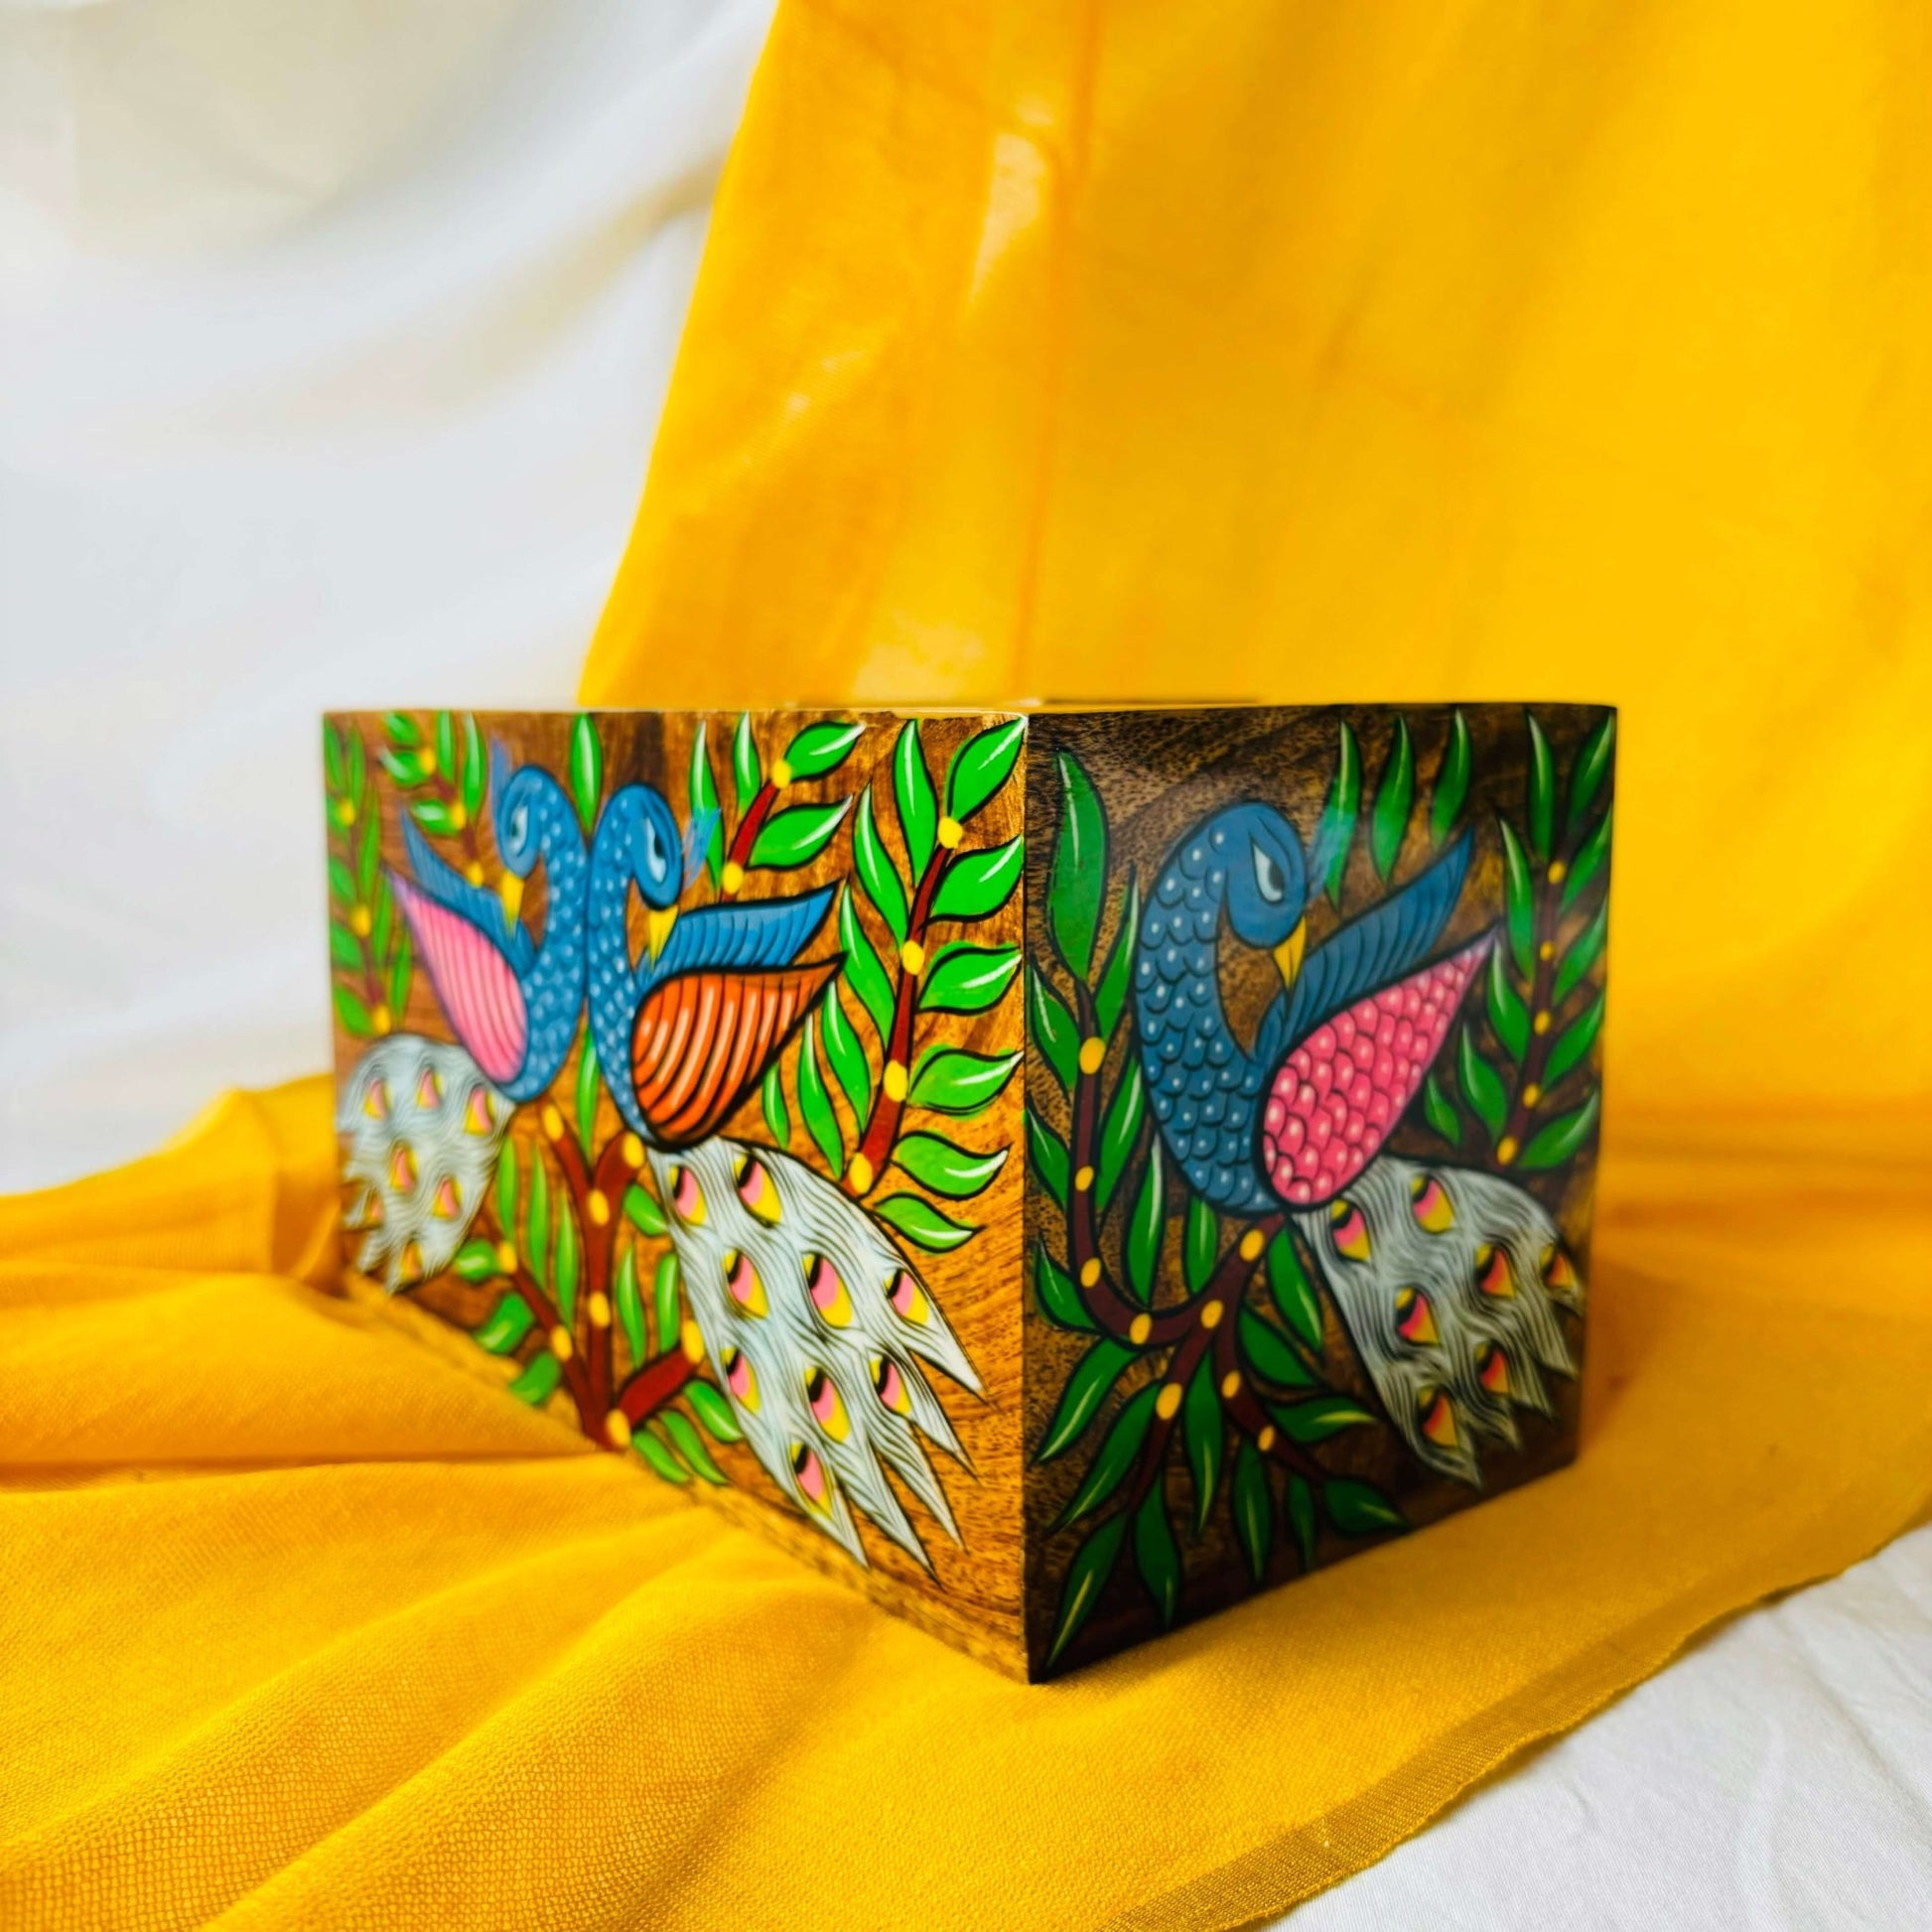 A pure mango wood table organiser or wood cutlery holder, with two peacocks, tree branches and leaves hand painted on it, placed at an angle on a yellow background